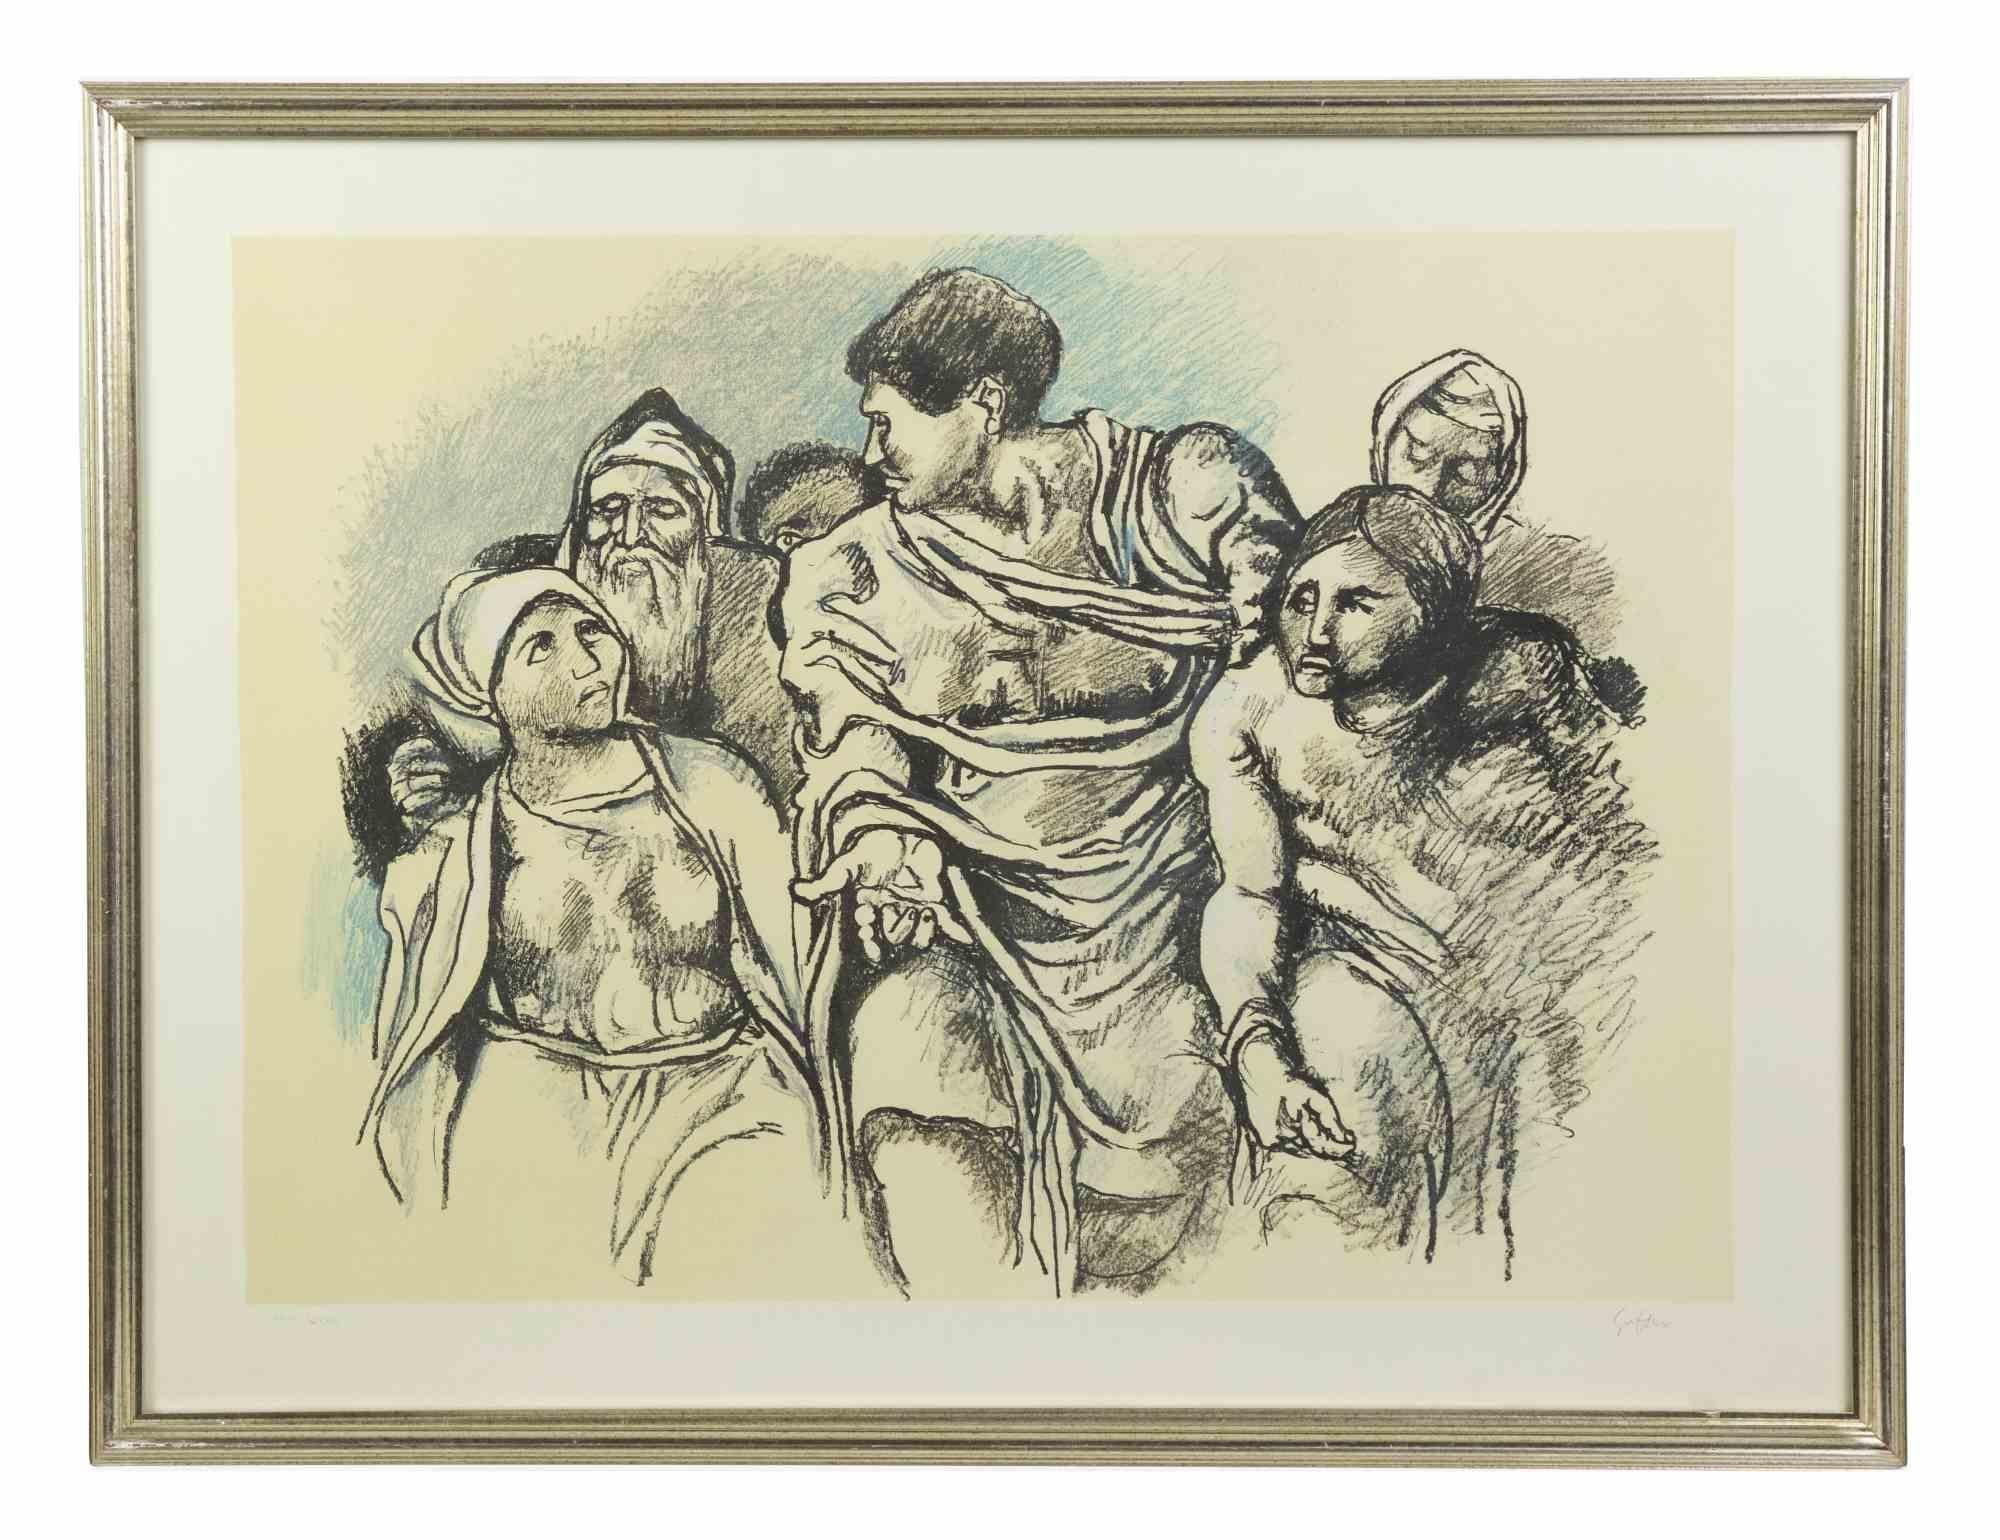 Homage to Michelangelo is an original artwork realized in 1975 by Renato Guttuso.

Mixed colored lithograph. Hand signed on the lower right margin.

Numbered on the lower left. Edition 141/200.

Edited by Buckman, Monaco.

Good conditions.

Includes